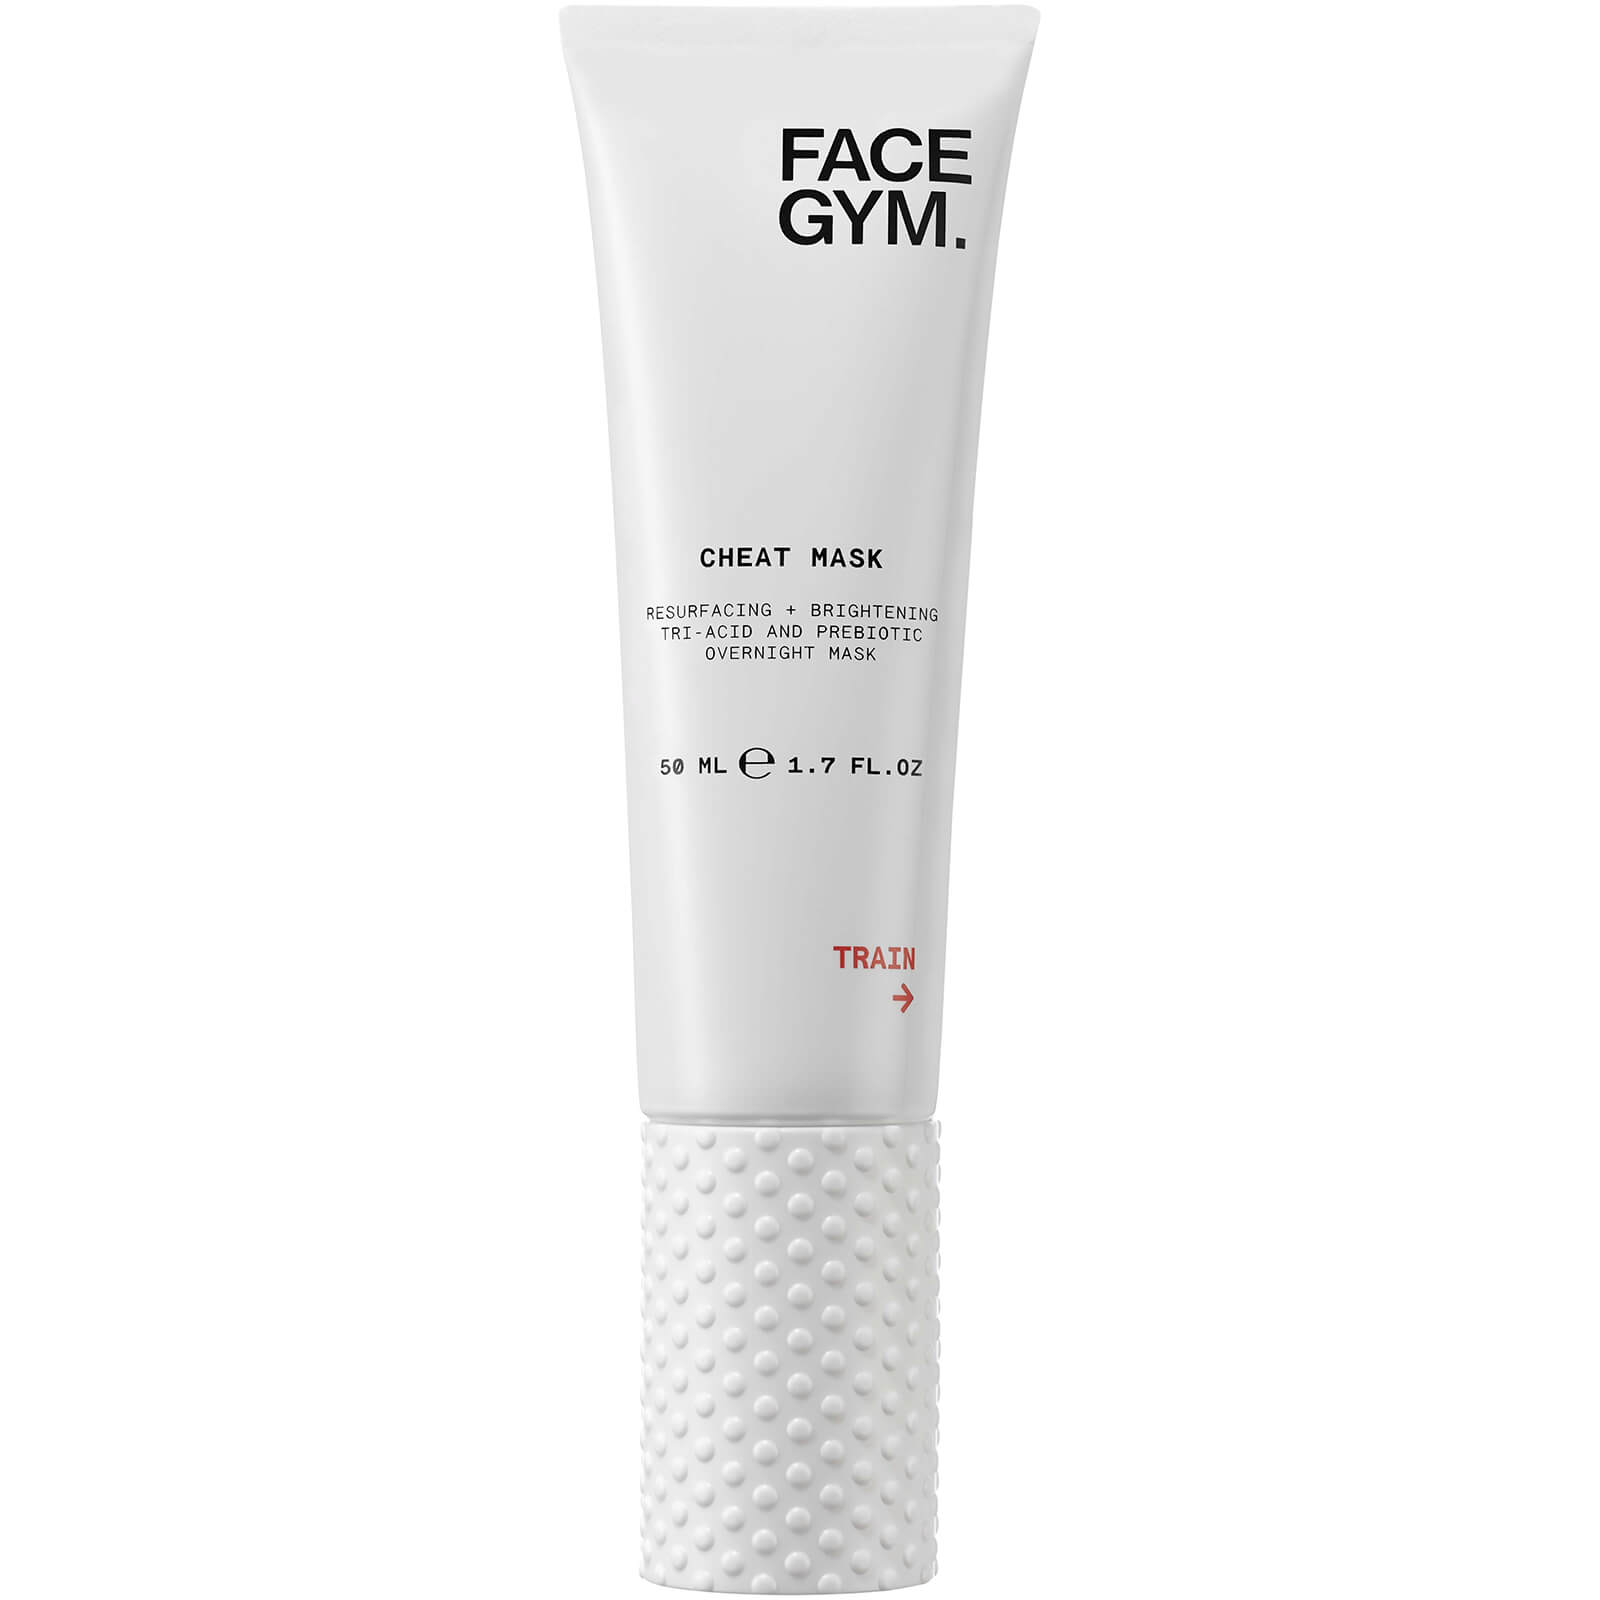 FaceGym Cheat Mask Resurfacing and Brightening Tri-Acid and Prebiotic Overnight Mask (Various Sizes) - 50ml